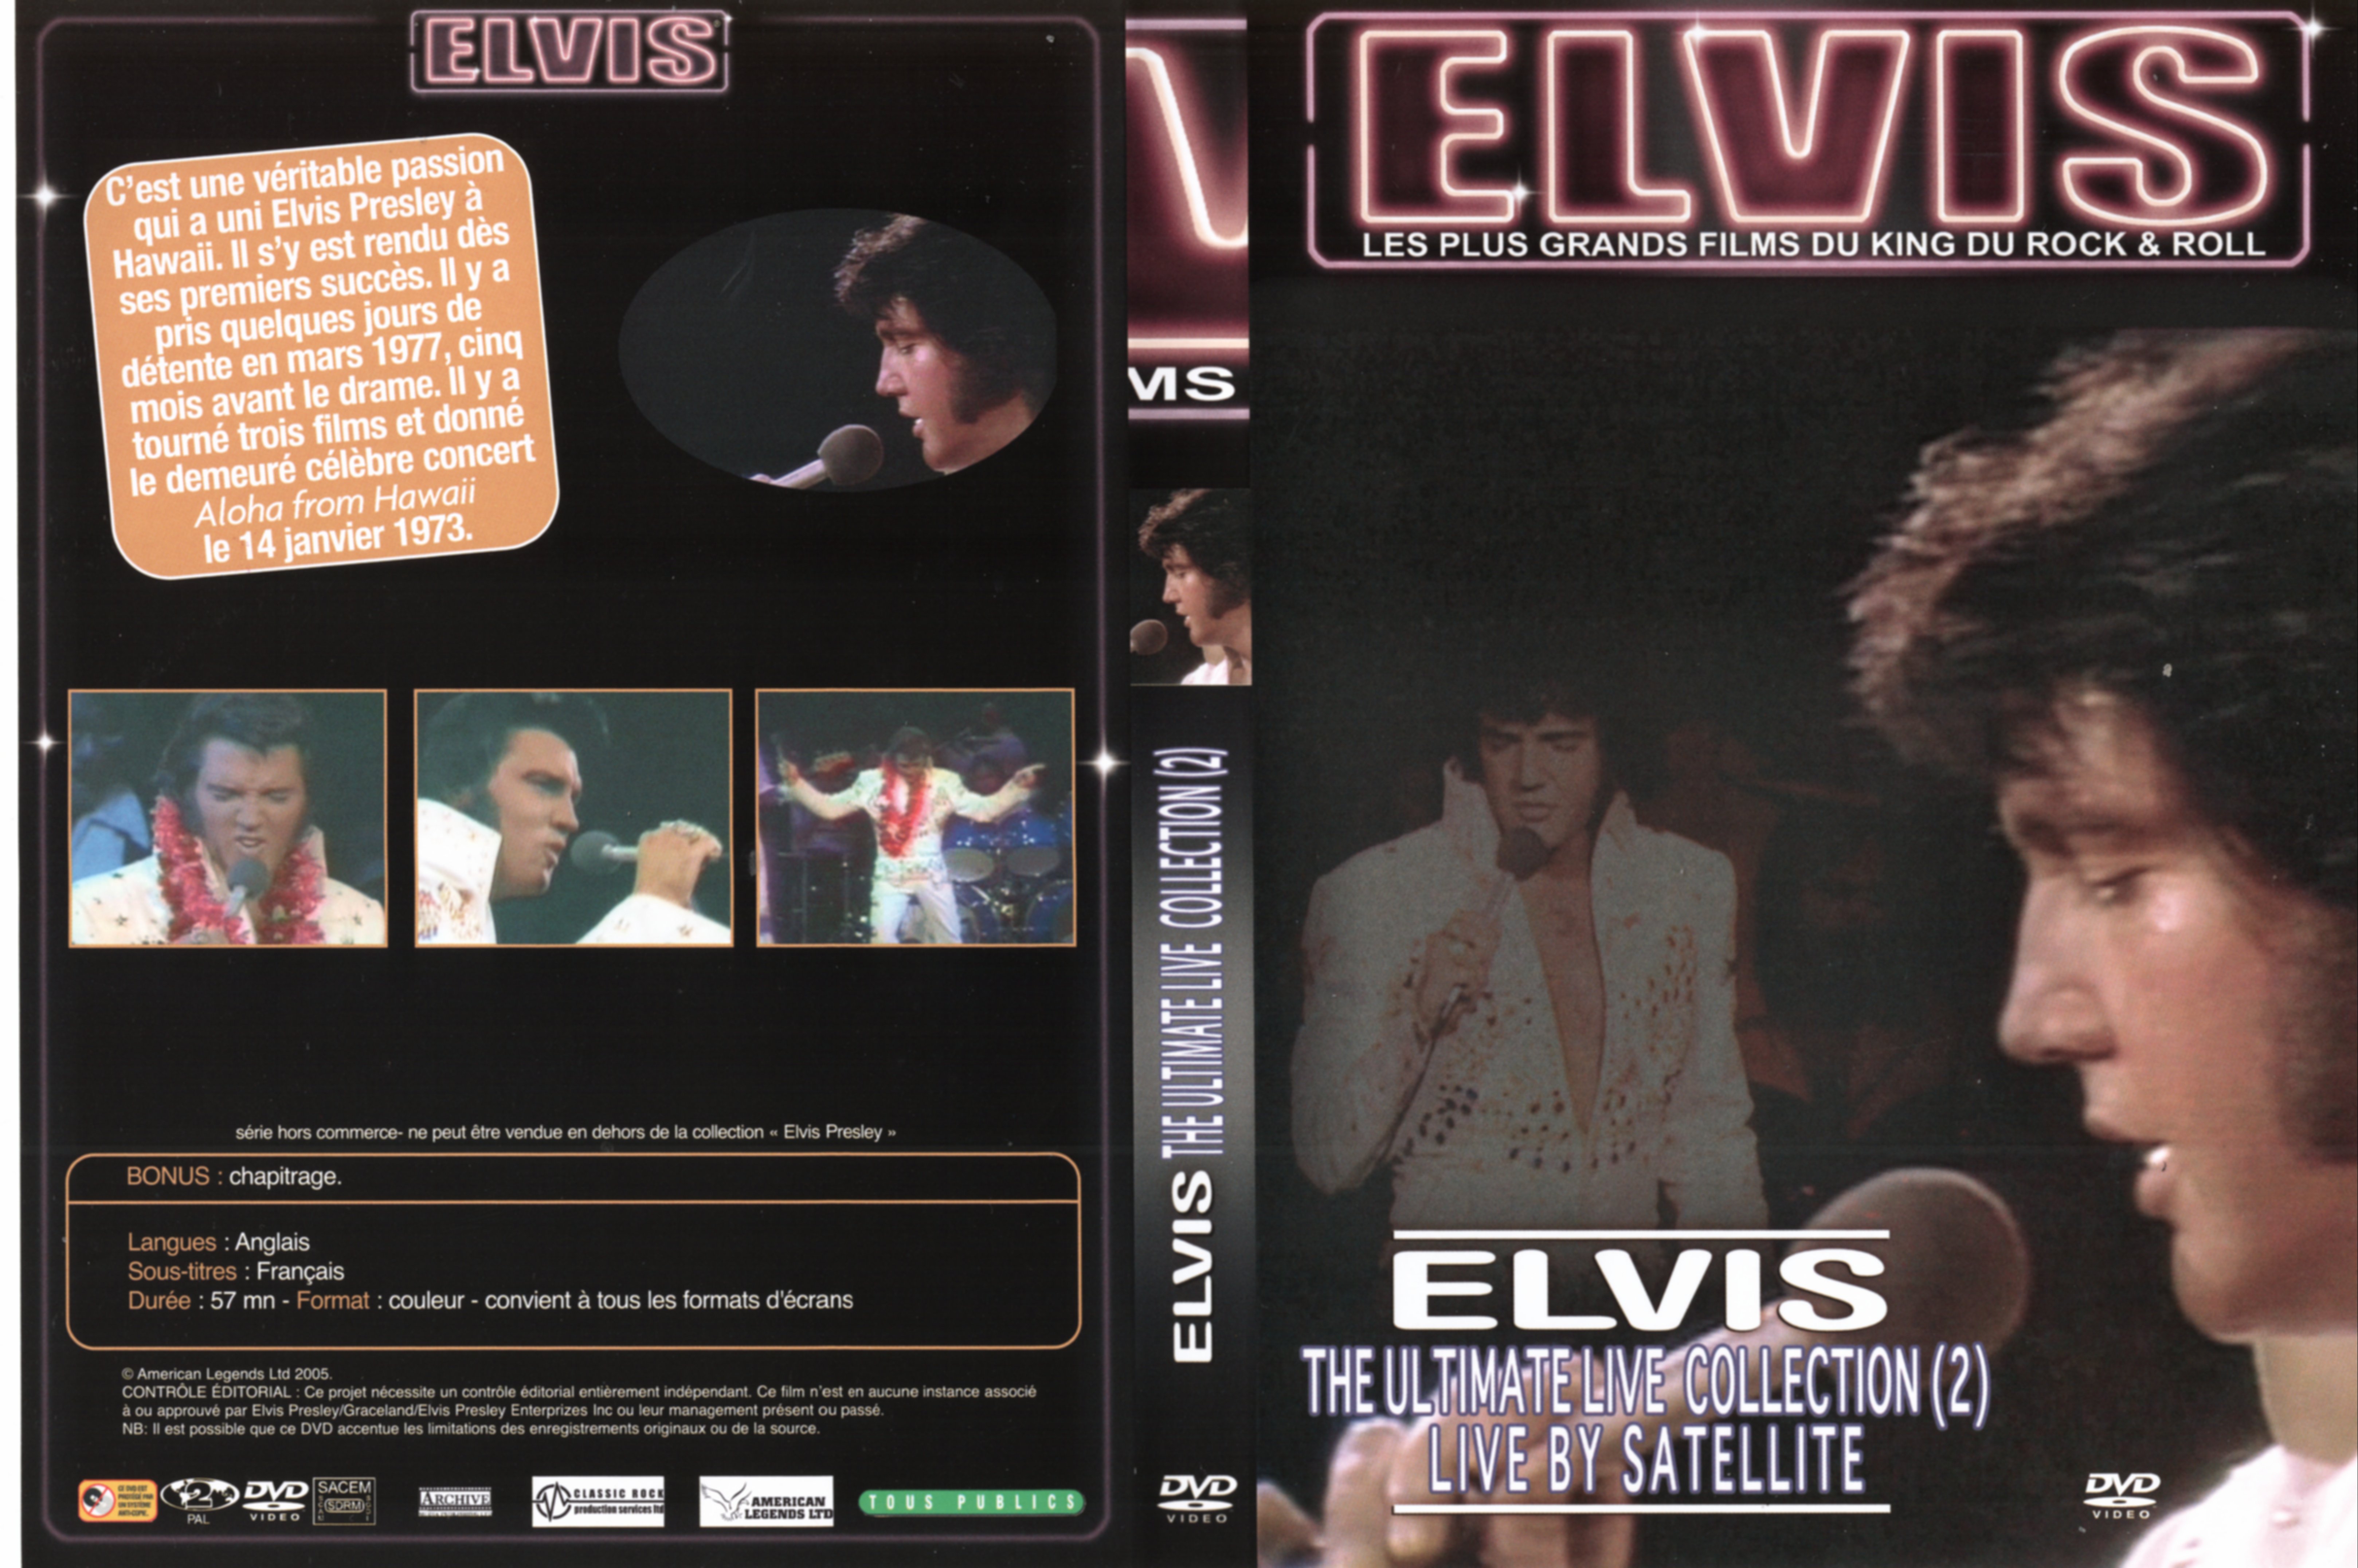 Jaquette DVD Elvis - The ultimate live collection 2